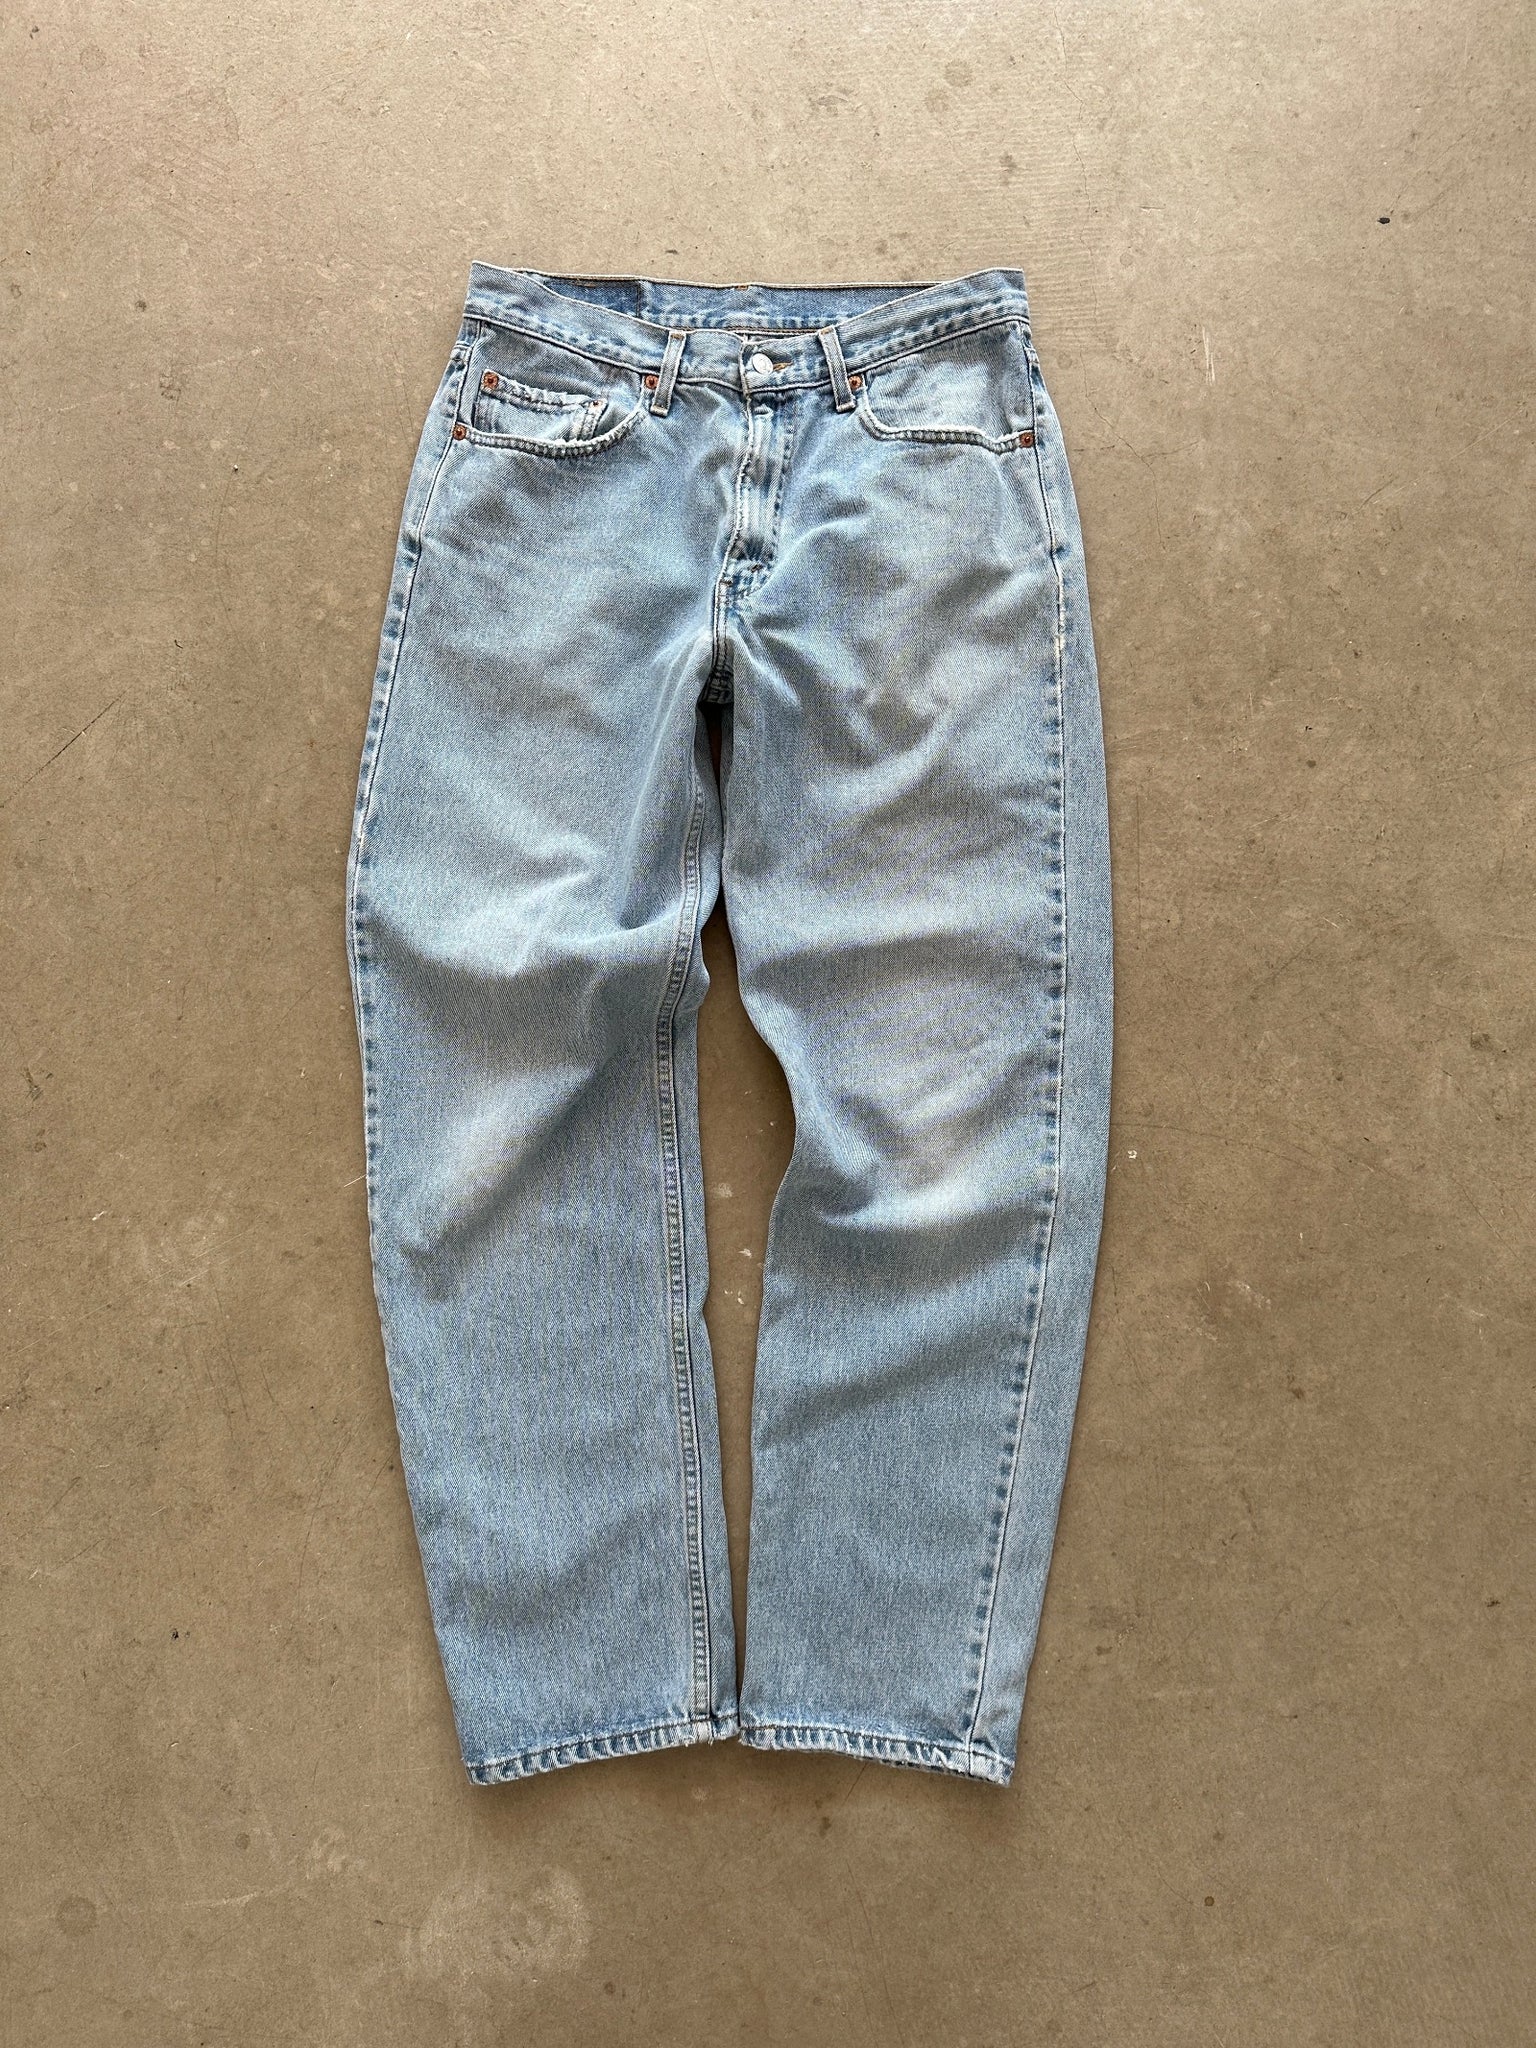 2000 Levi's 550 Relaxed Jeans - 34 x 32